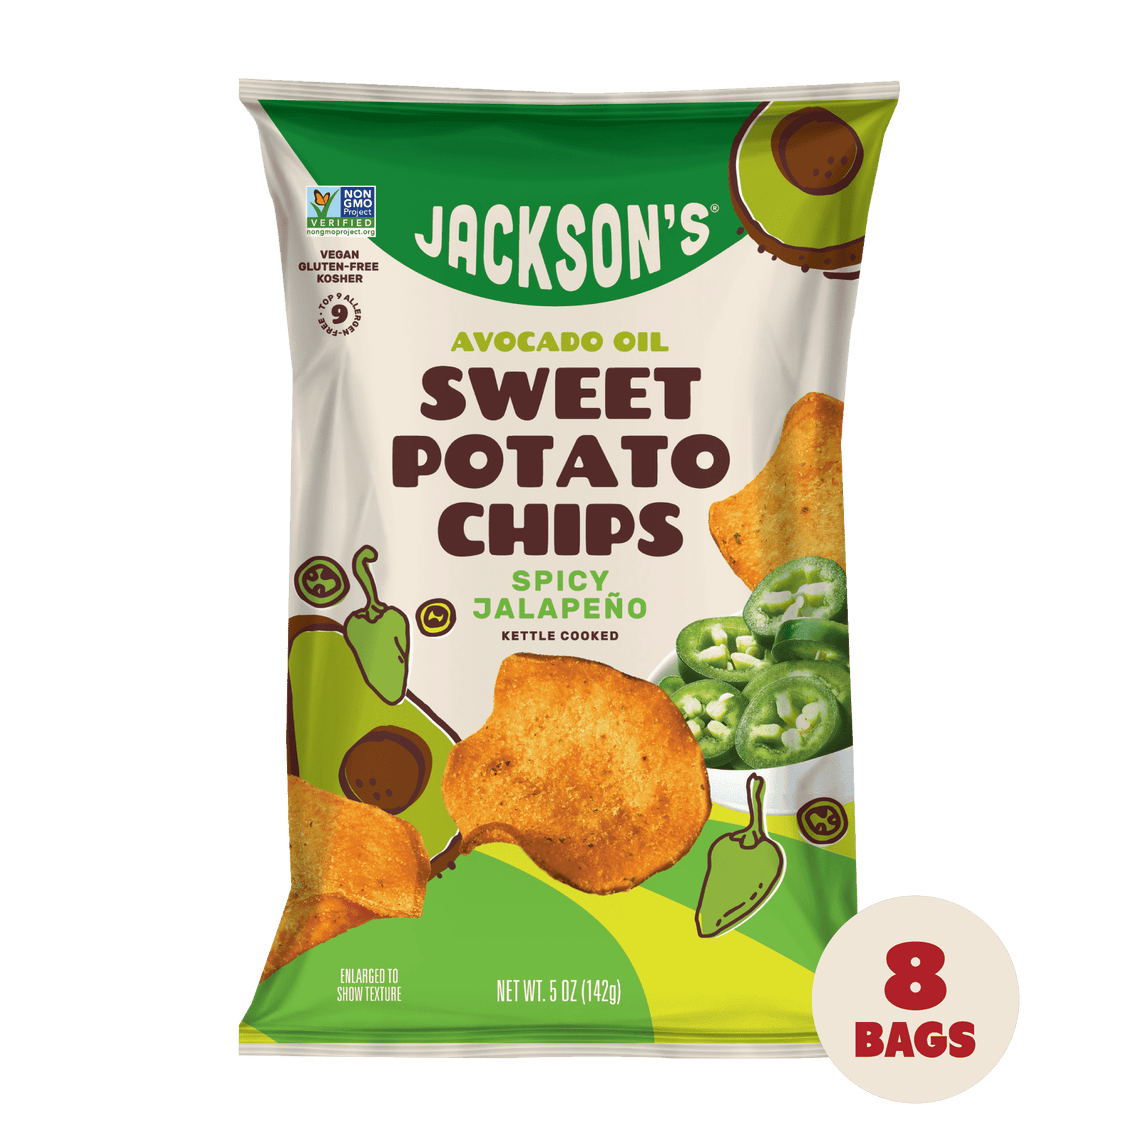 Spicy Jalapeño Sweet Potato Chips in Avocado Oil 5oz - 8 Bags. Paleo and Gluten-Free